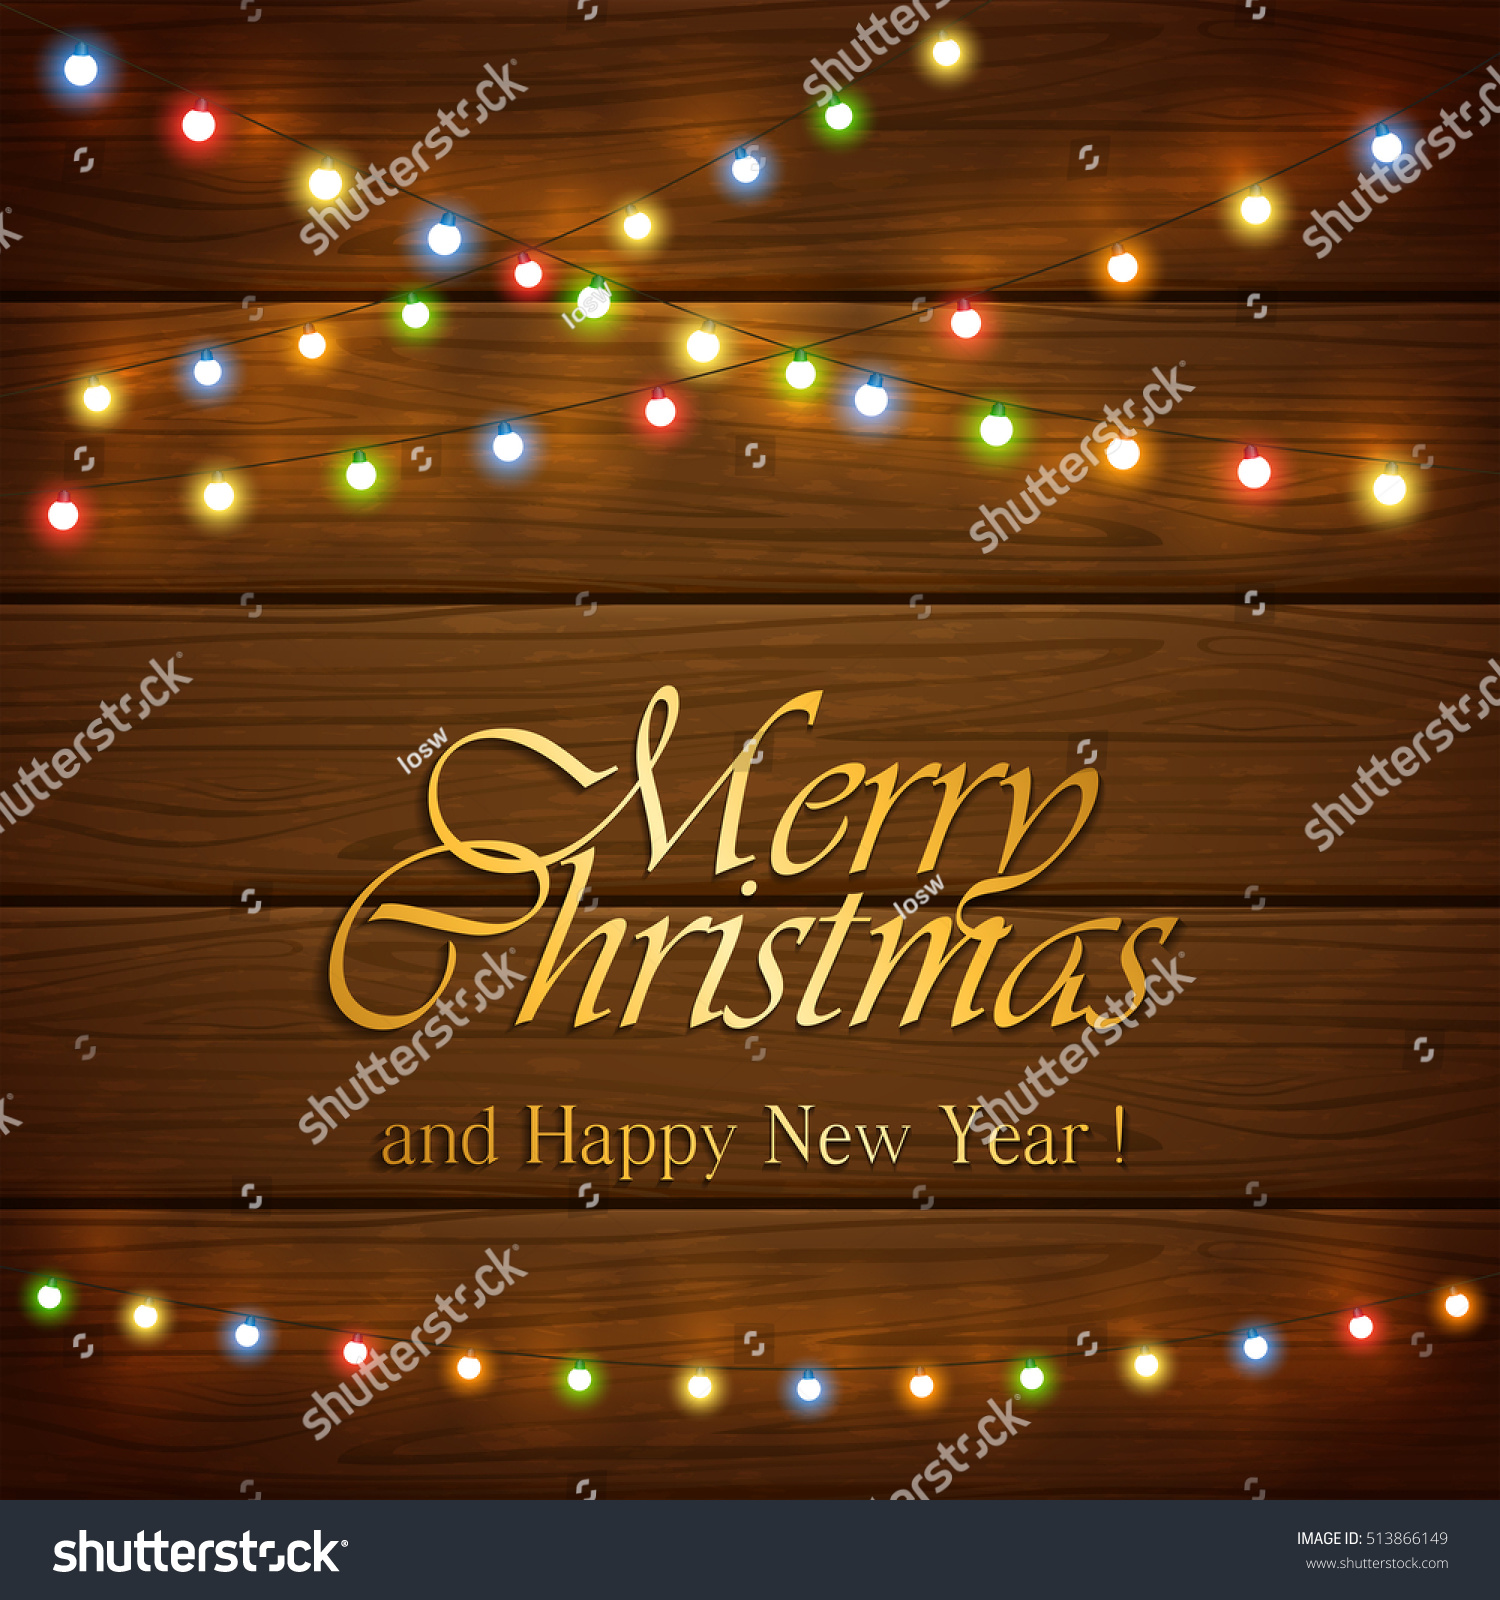 Colorful Christmas light with inscriptions Merry Christmas and Happy New Year on wooden background holiday